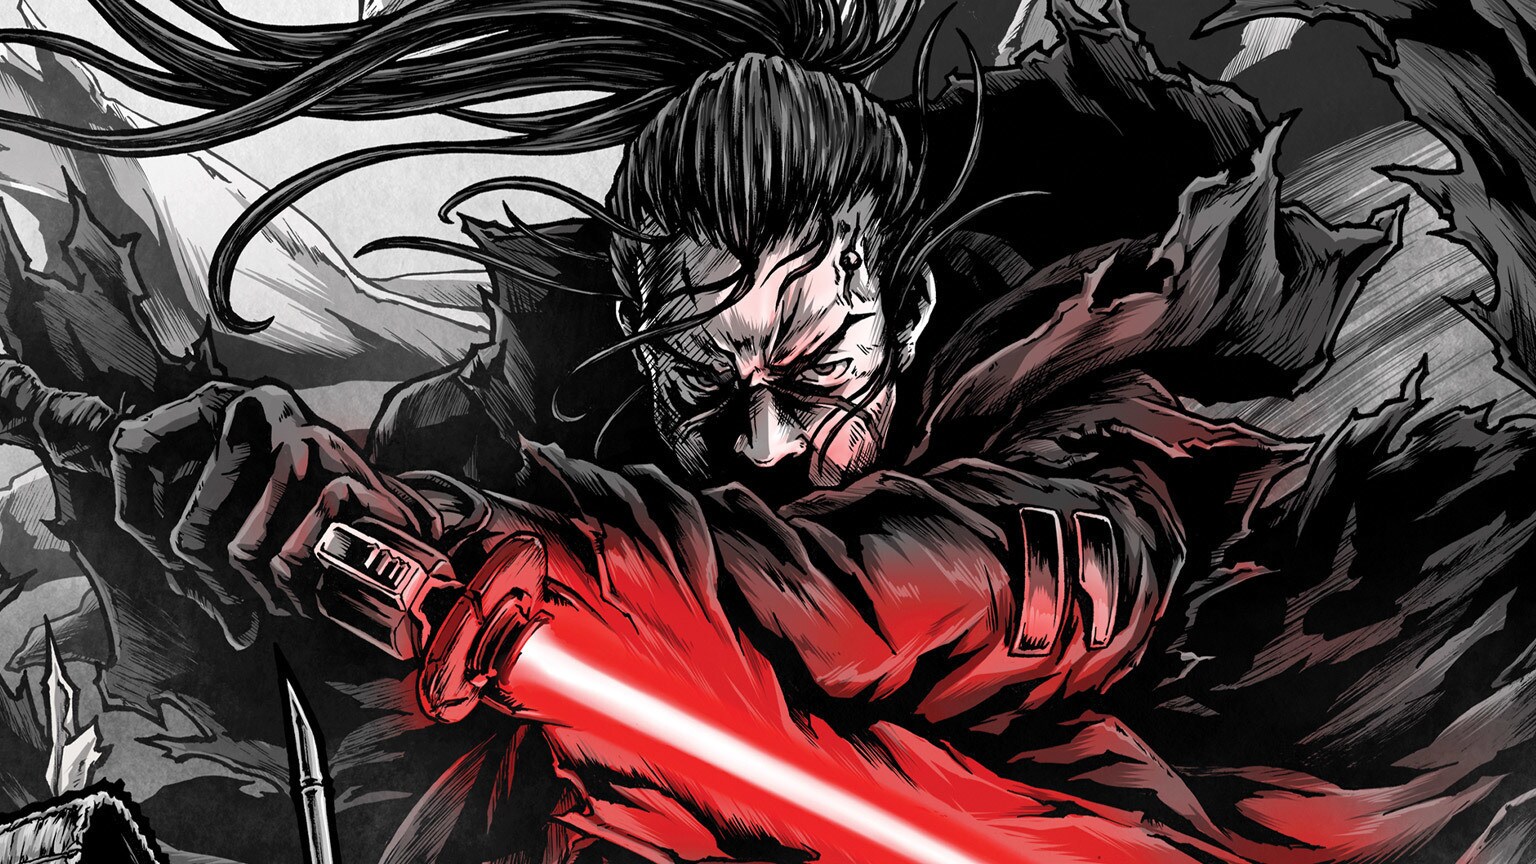 The Ronin Strikes Back in Marvel’s Star Wars: Visions #1 – Exclusive Preview